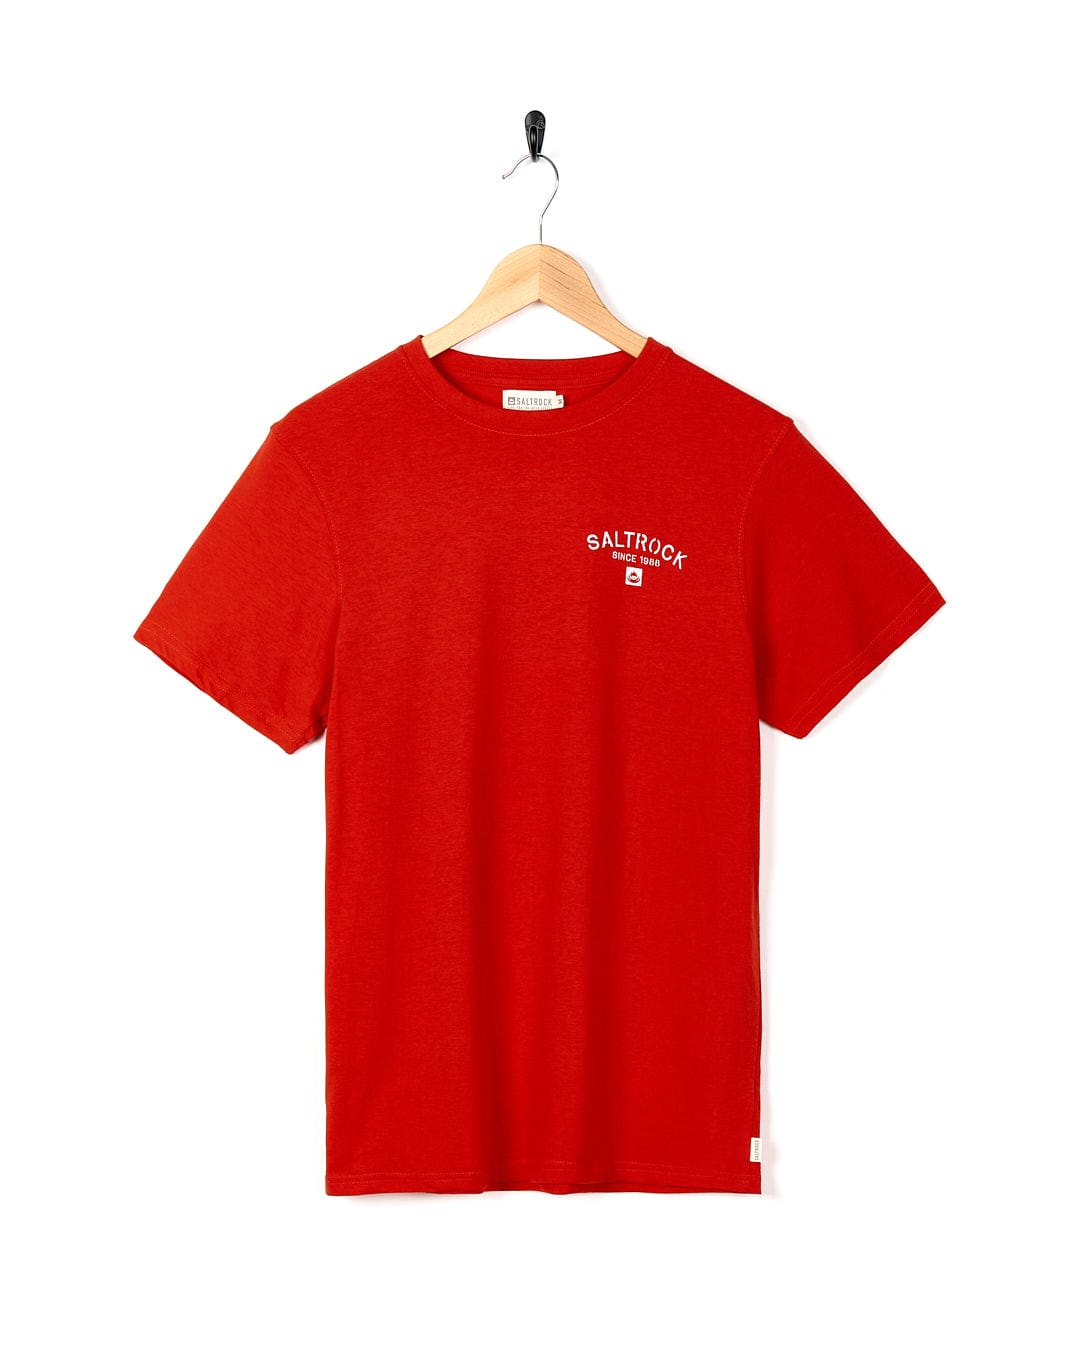 A Saltrock Stencil - Mens Location T-Shirt - Swanage - Red with a white logo on it.